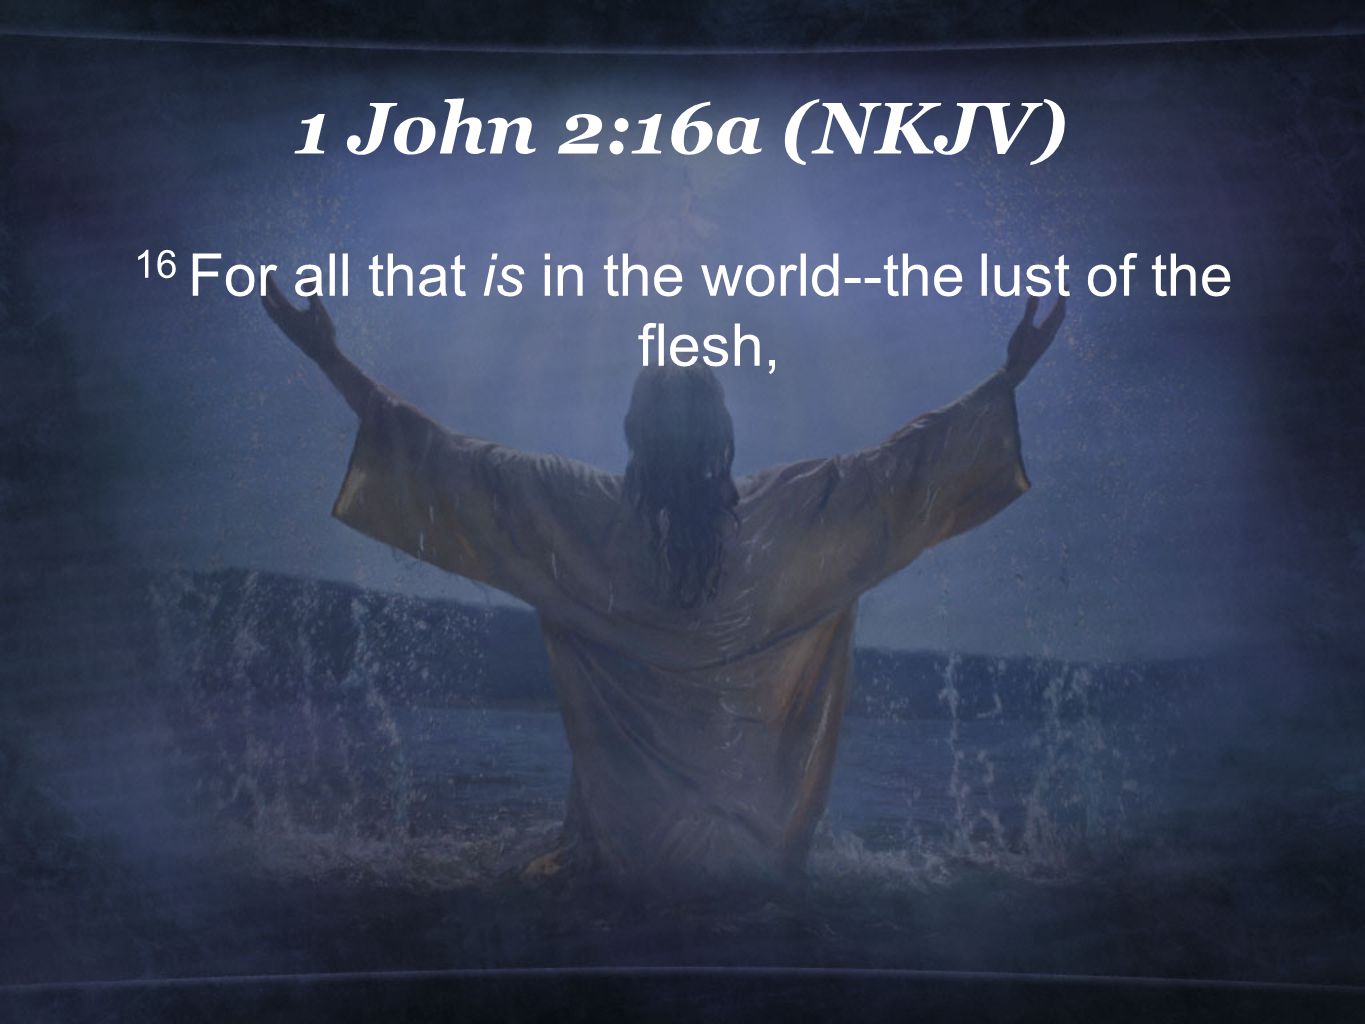 1 John 2:16a (NKJV) 16 For all that is in the world--the lust of the flesh,